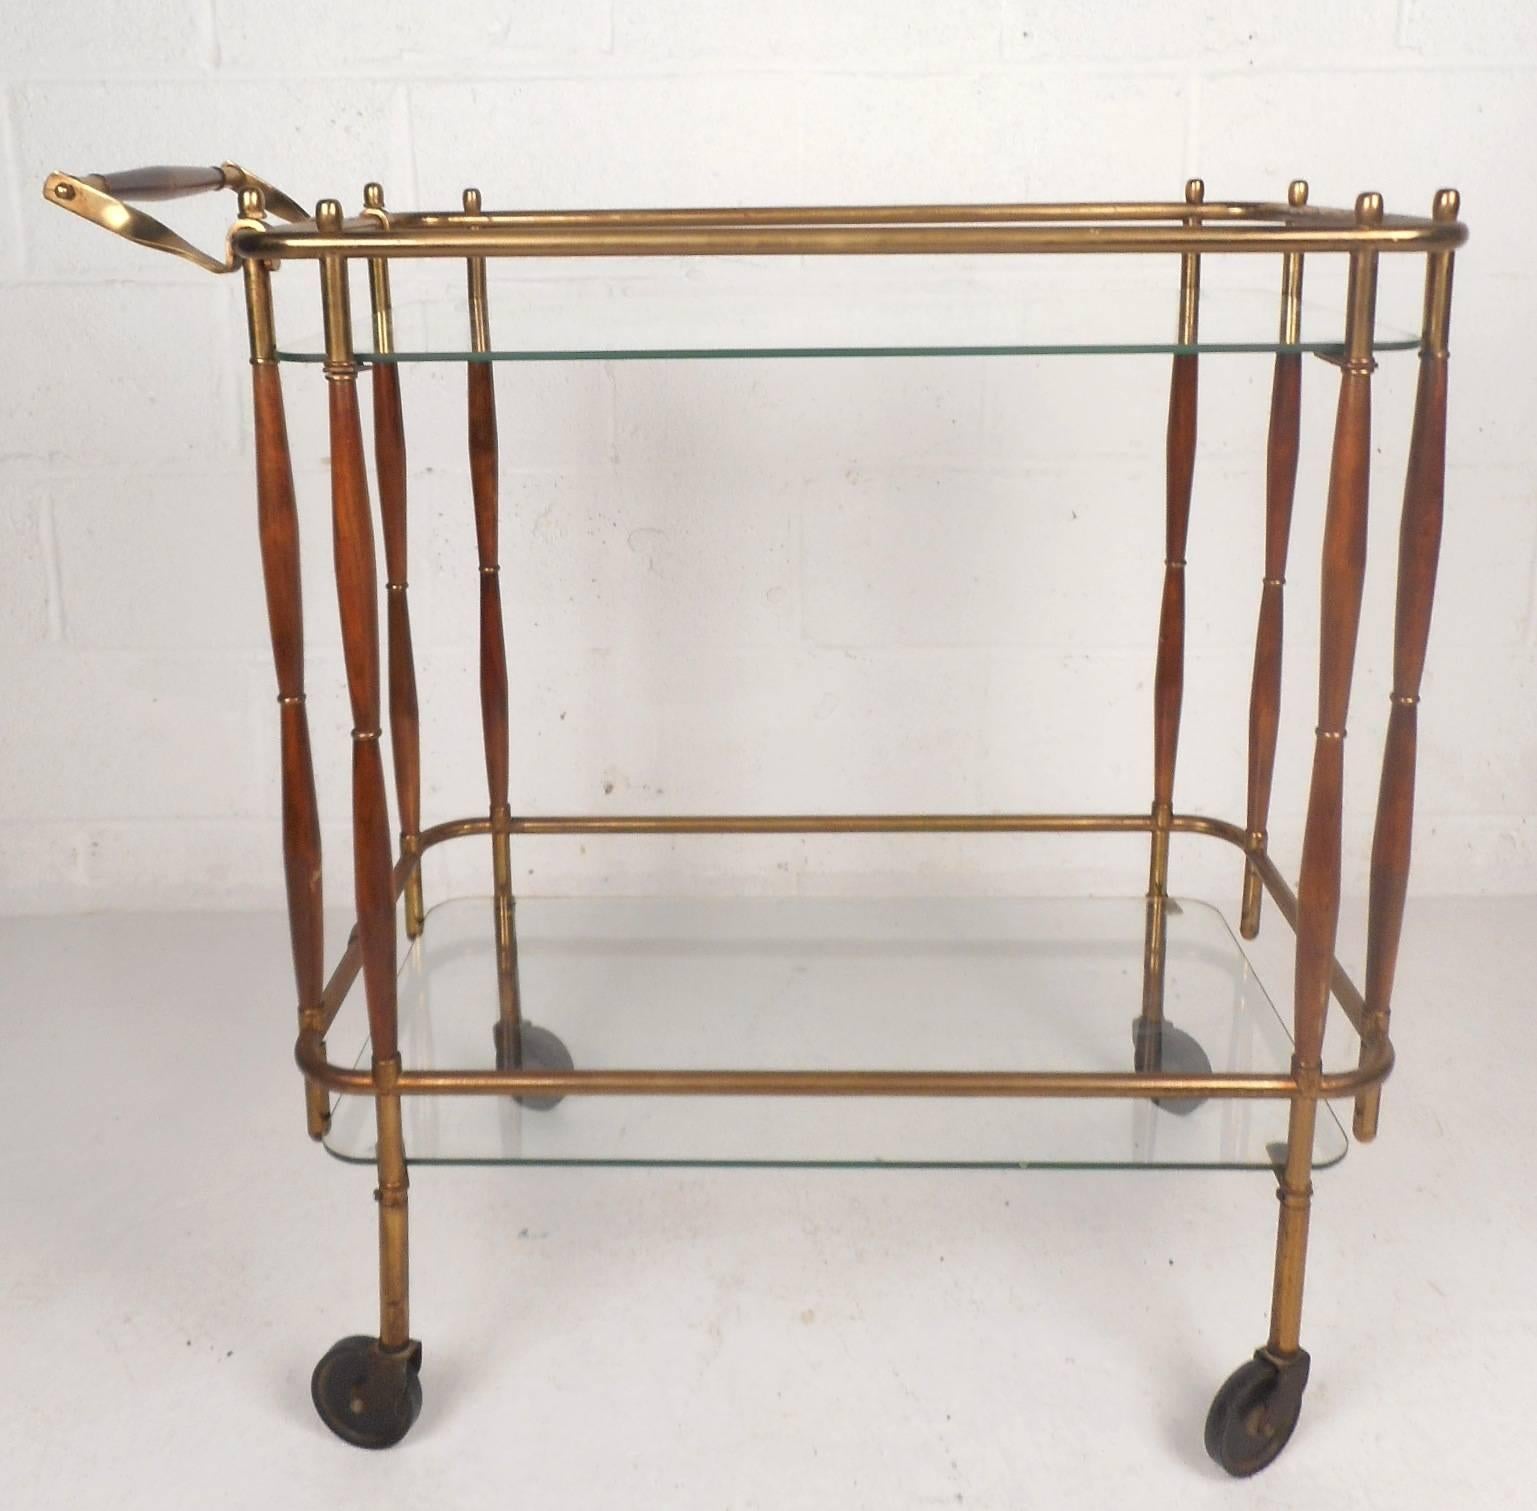 This beautiful vintage modern bar cart features a stylish two-tone brass and wood frame on wheels. Sleek and functional design with two tiers of glass shelving for placing items. Unique design shows quality construction and makes the perfect eye